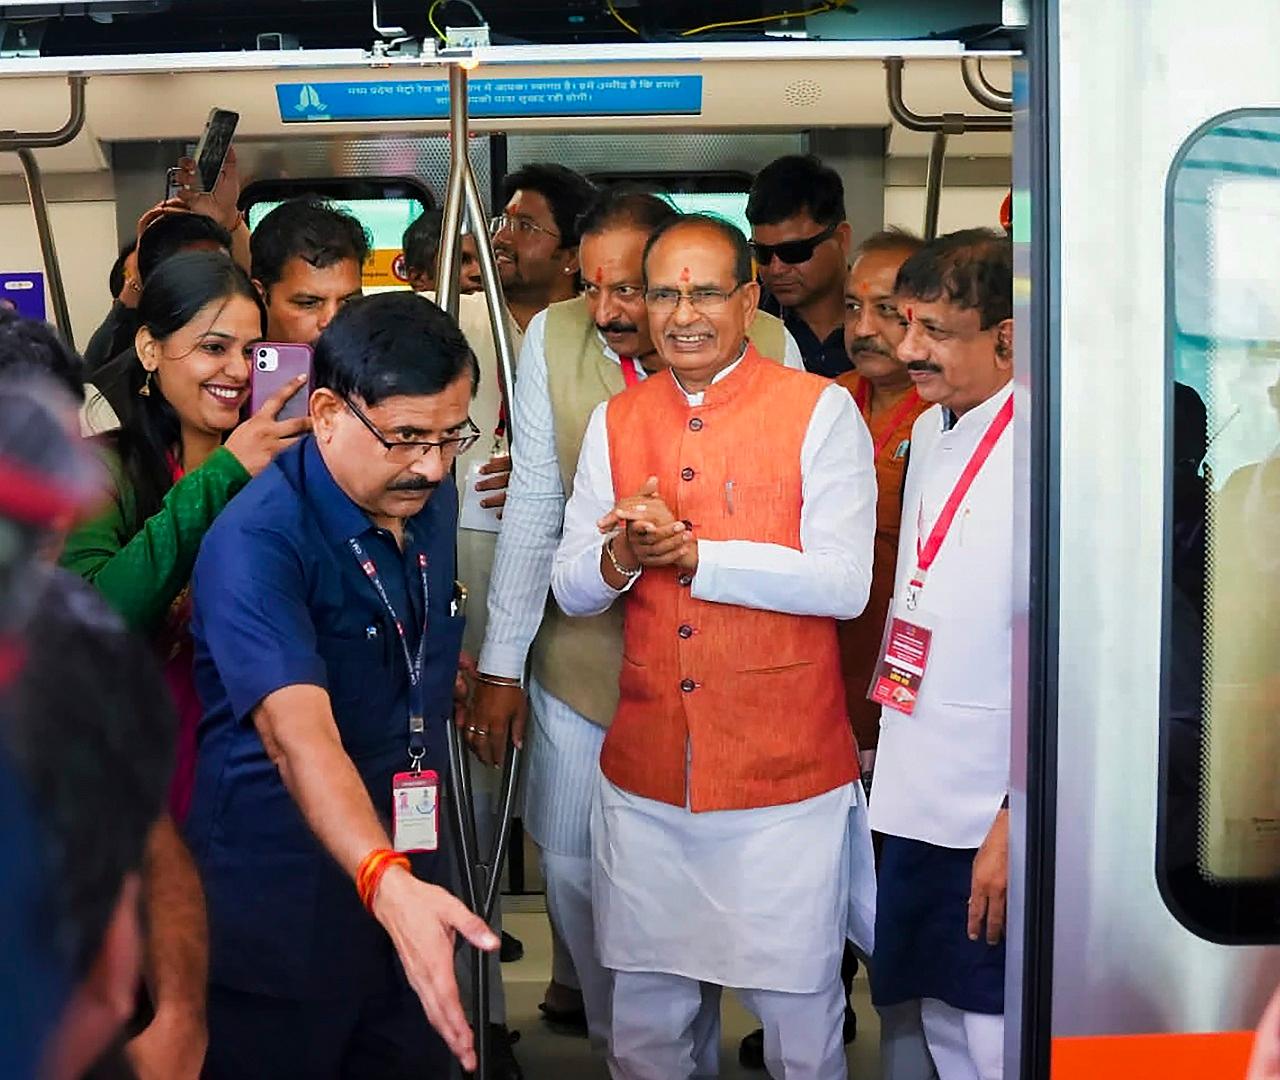 During this function, CM Chouhan also performed worship ahead of showing green signal to the metro train. The Chief Minister also had a ride on the metro train